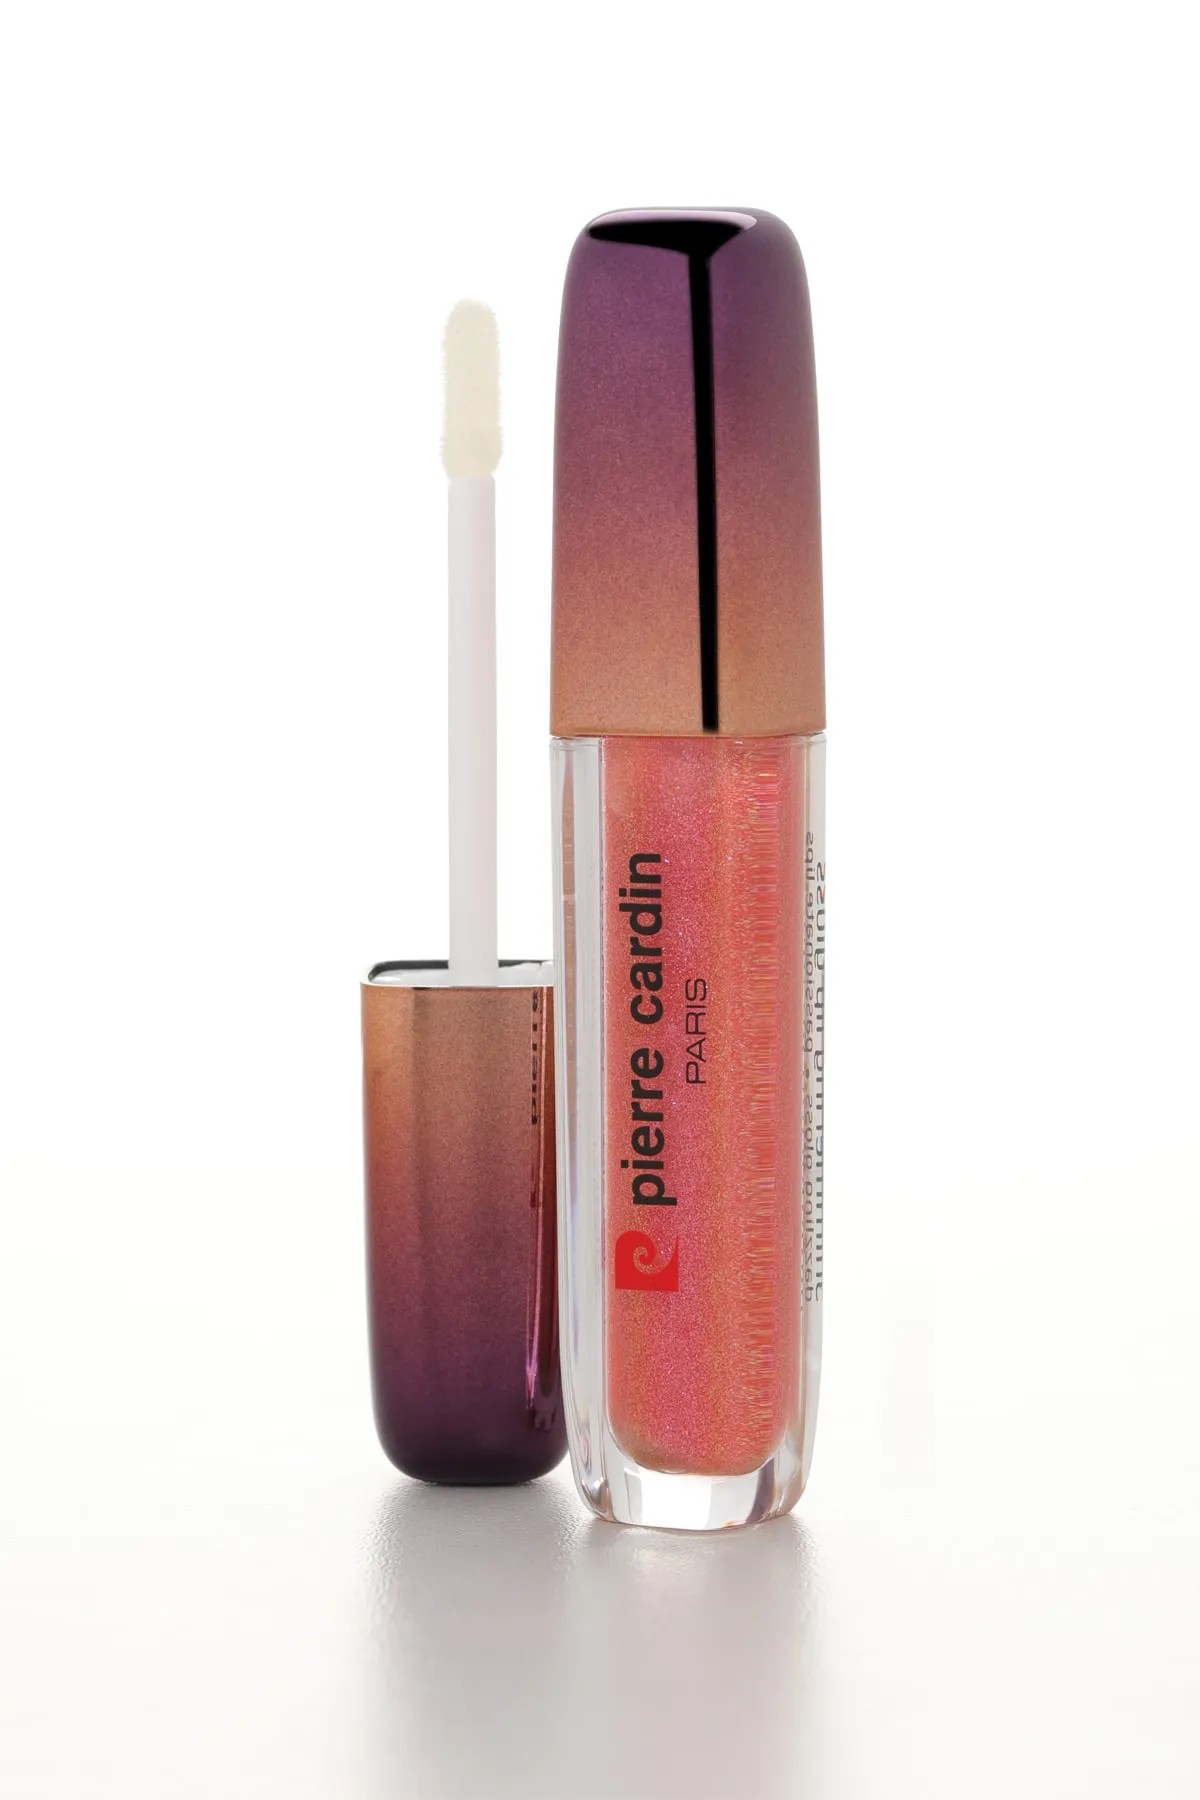 Pierre Cardin Shimmering Lipgloss Peach Pink